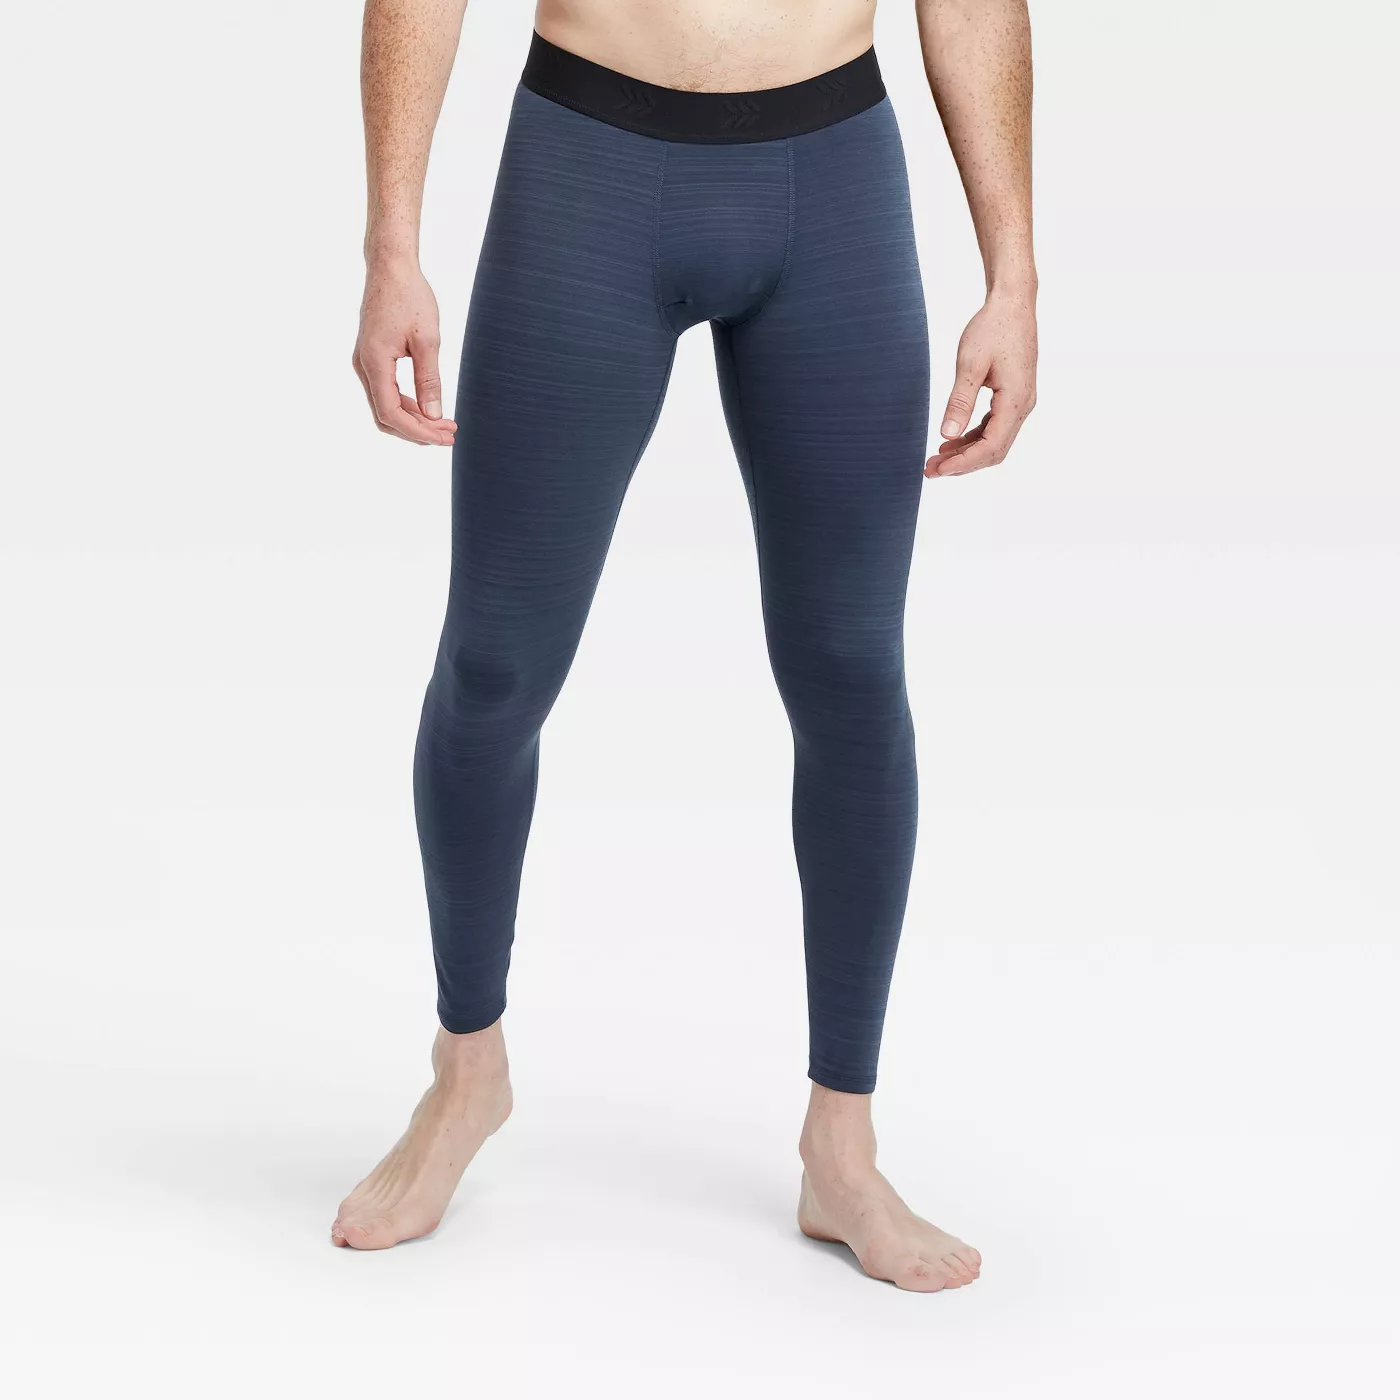 How to Use Compression Gear to Get the Most out of Your Training